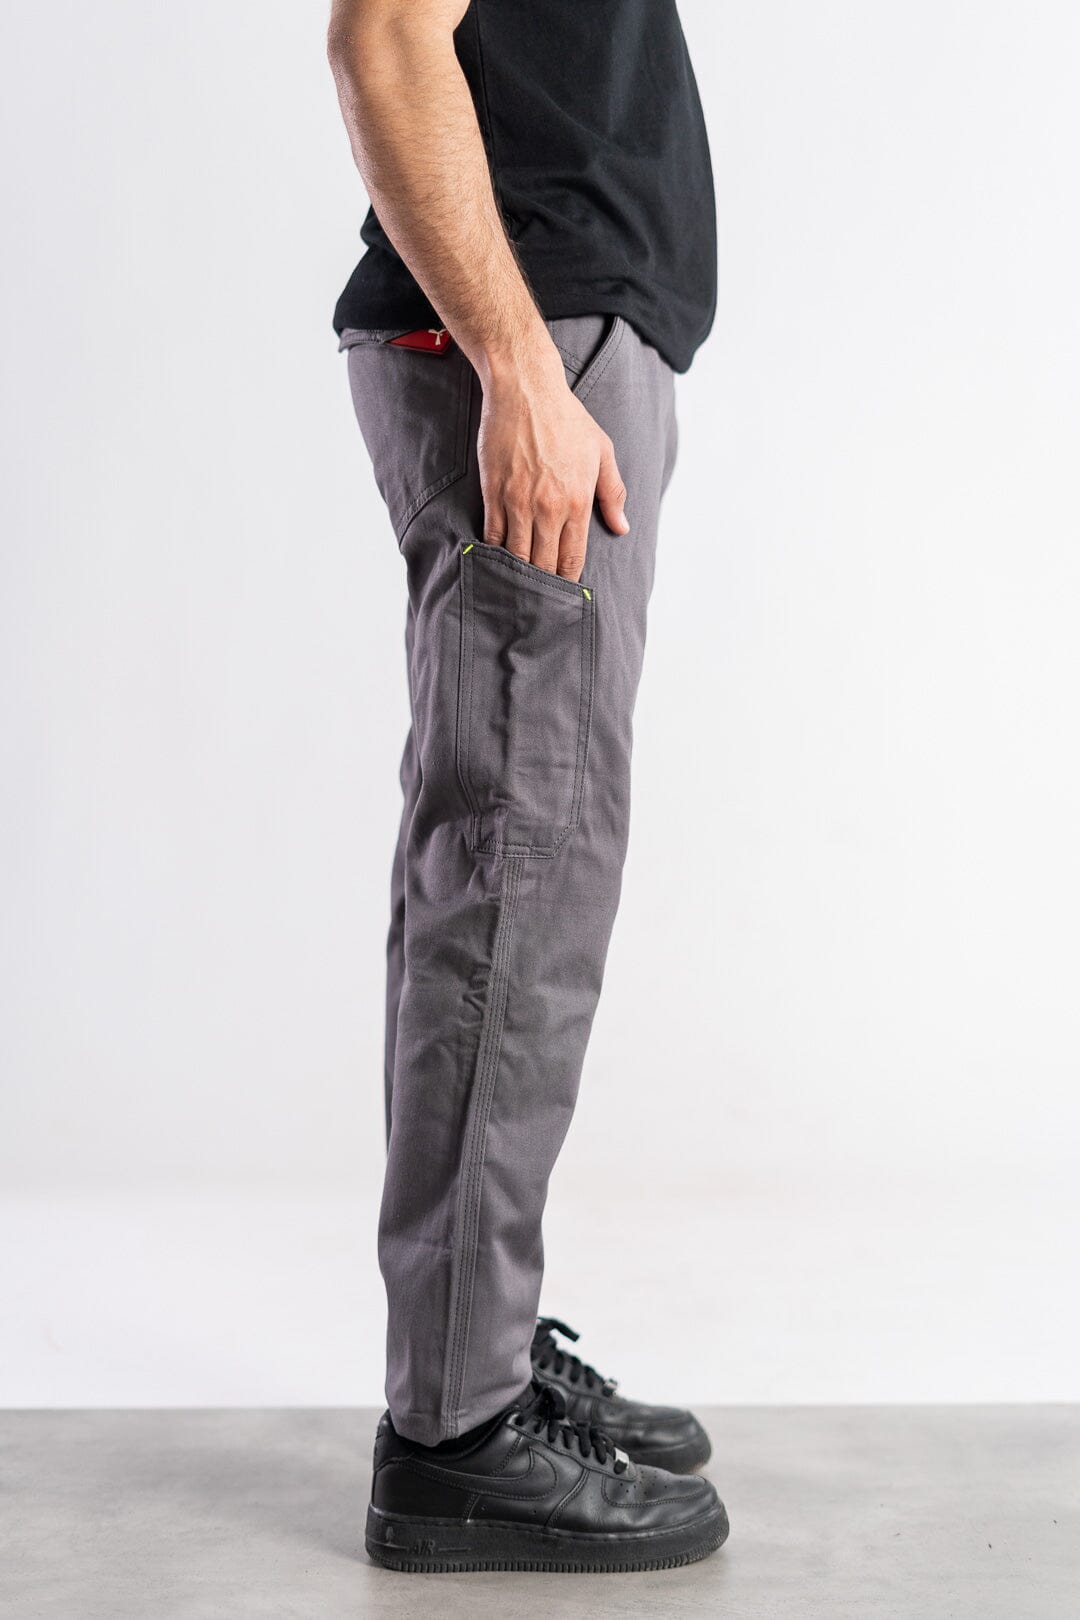 Buy STOP Textured Polyester Viscose Slim Fit Men's Trousers | Shoppers Stop